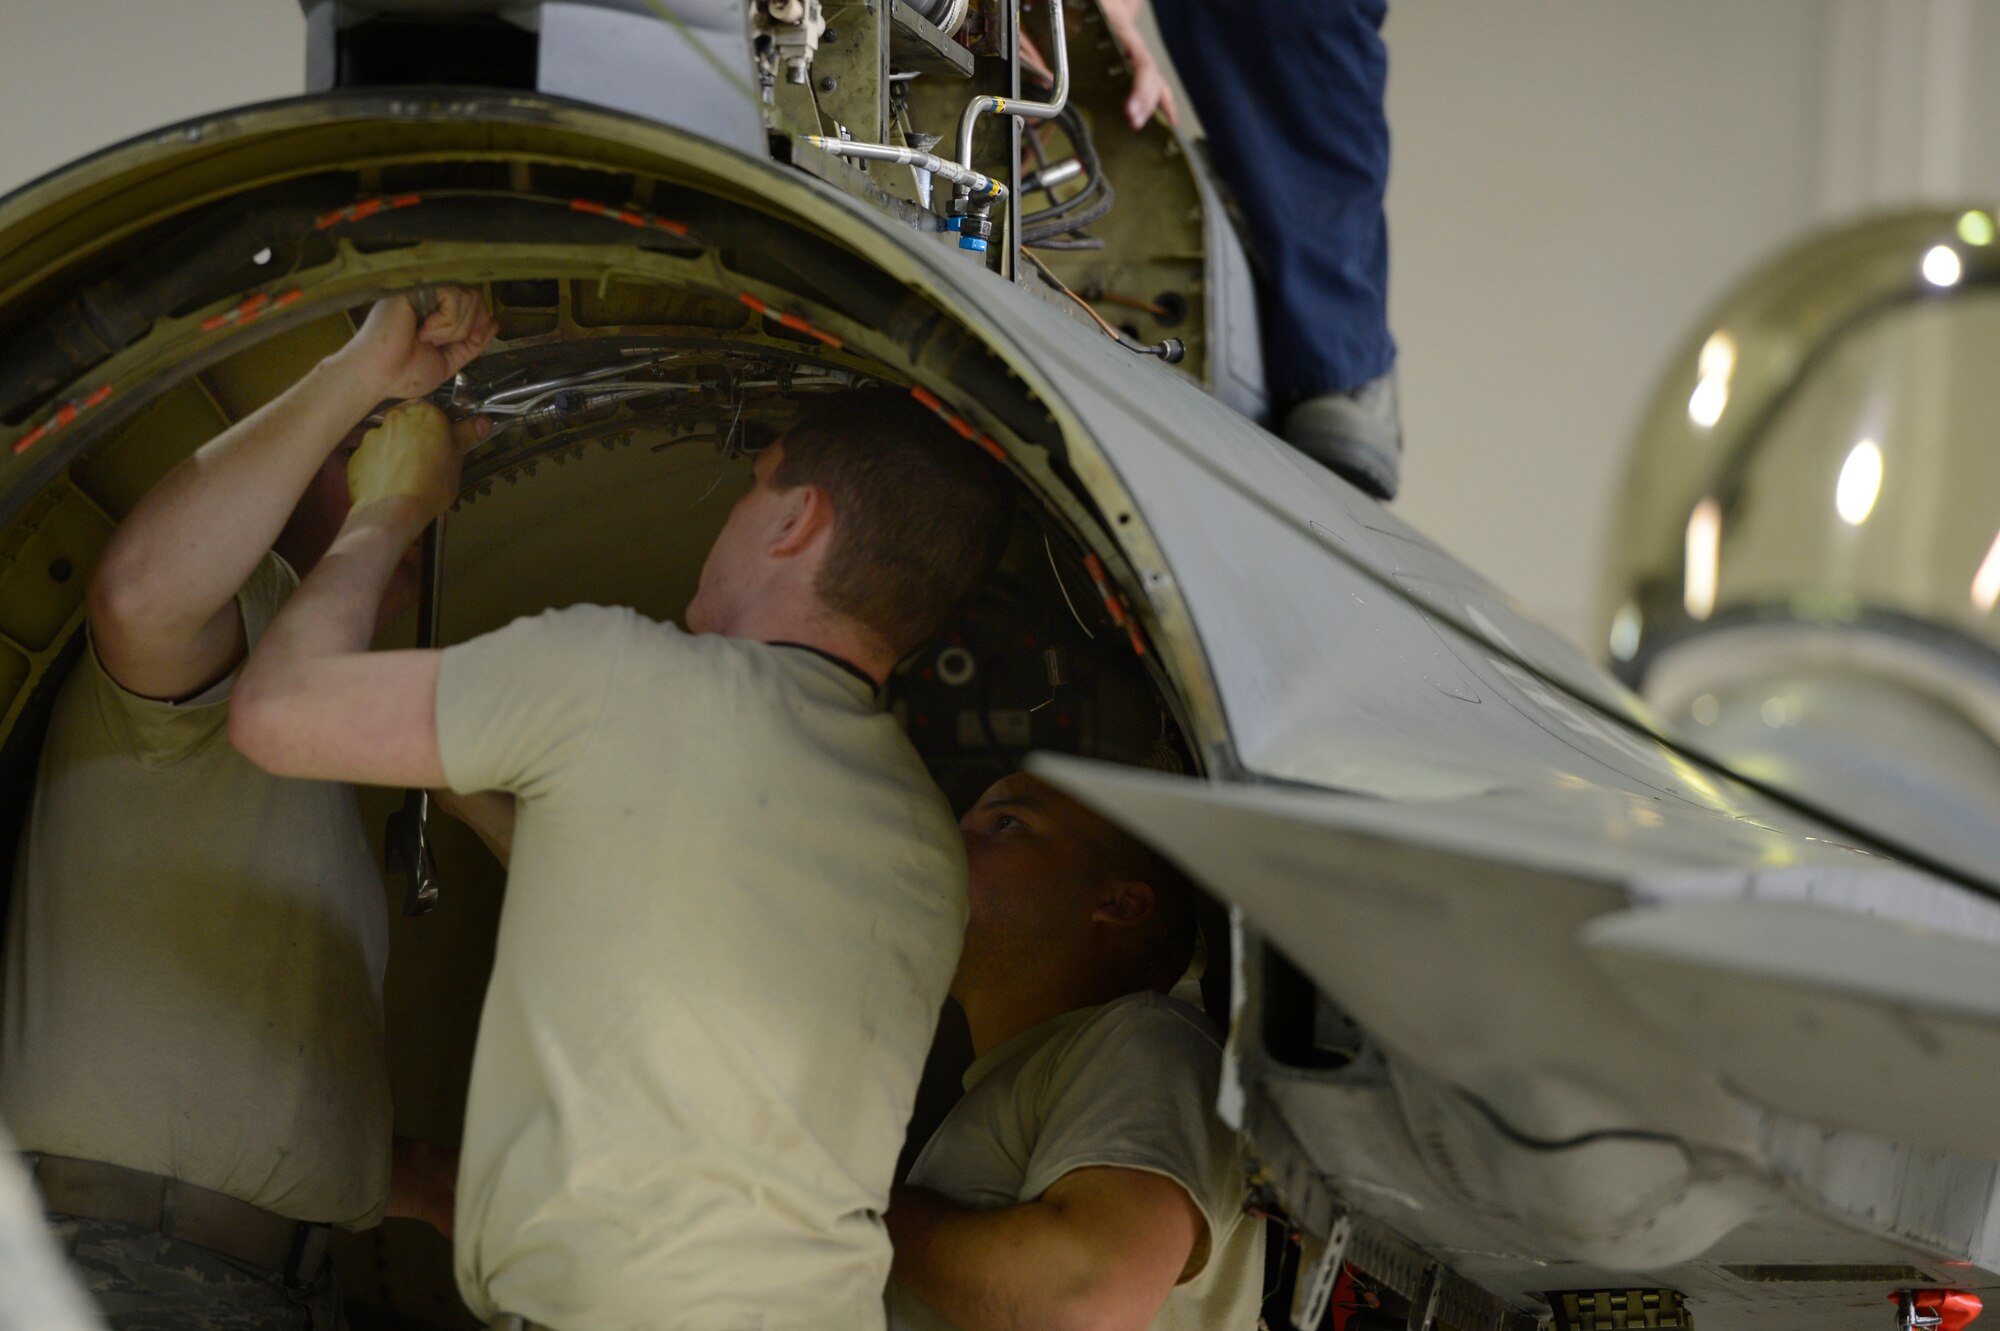 Members of the 52nd Equipment Maintenance Squadron work together to unscrew bolts off of a F-16 Fighting Falcon vertical stabilizer Feb. 25, 2014 at Spangdahlem Air Base, Germany. The vertical stabilizer of the F-16 Fighting Falcon was removed in order to make repairs to aircraft brackets. (U.S. Air Force photo by Staff Sgt. Christopher Ruano/Released)